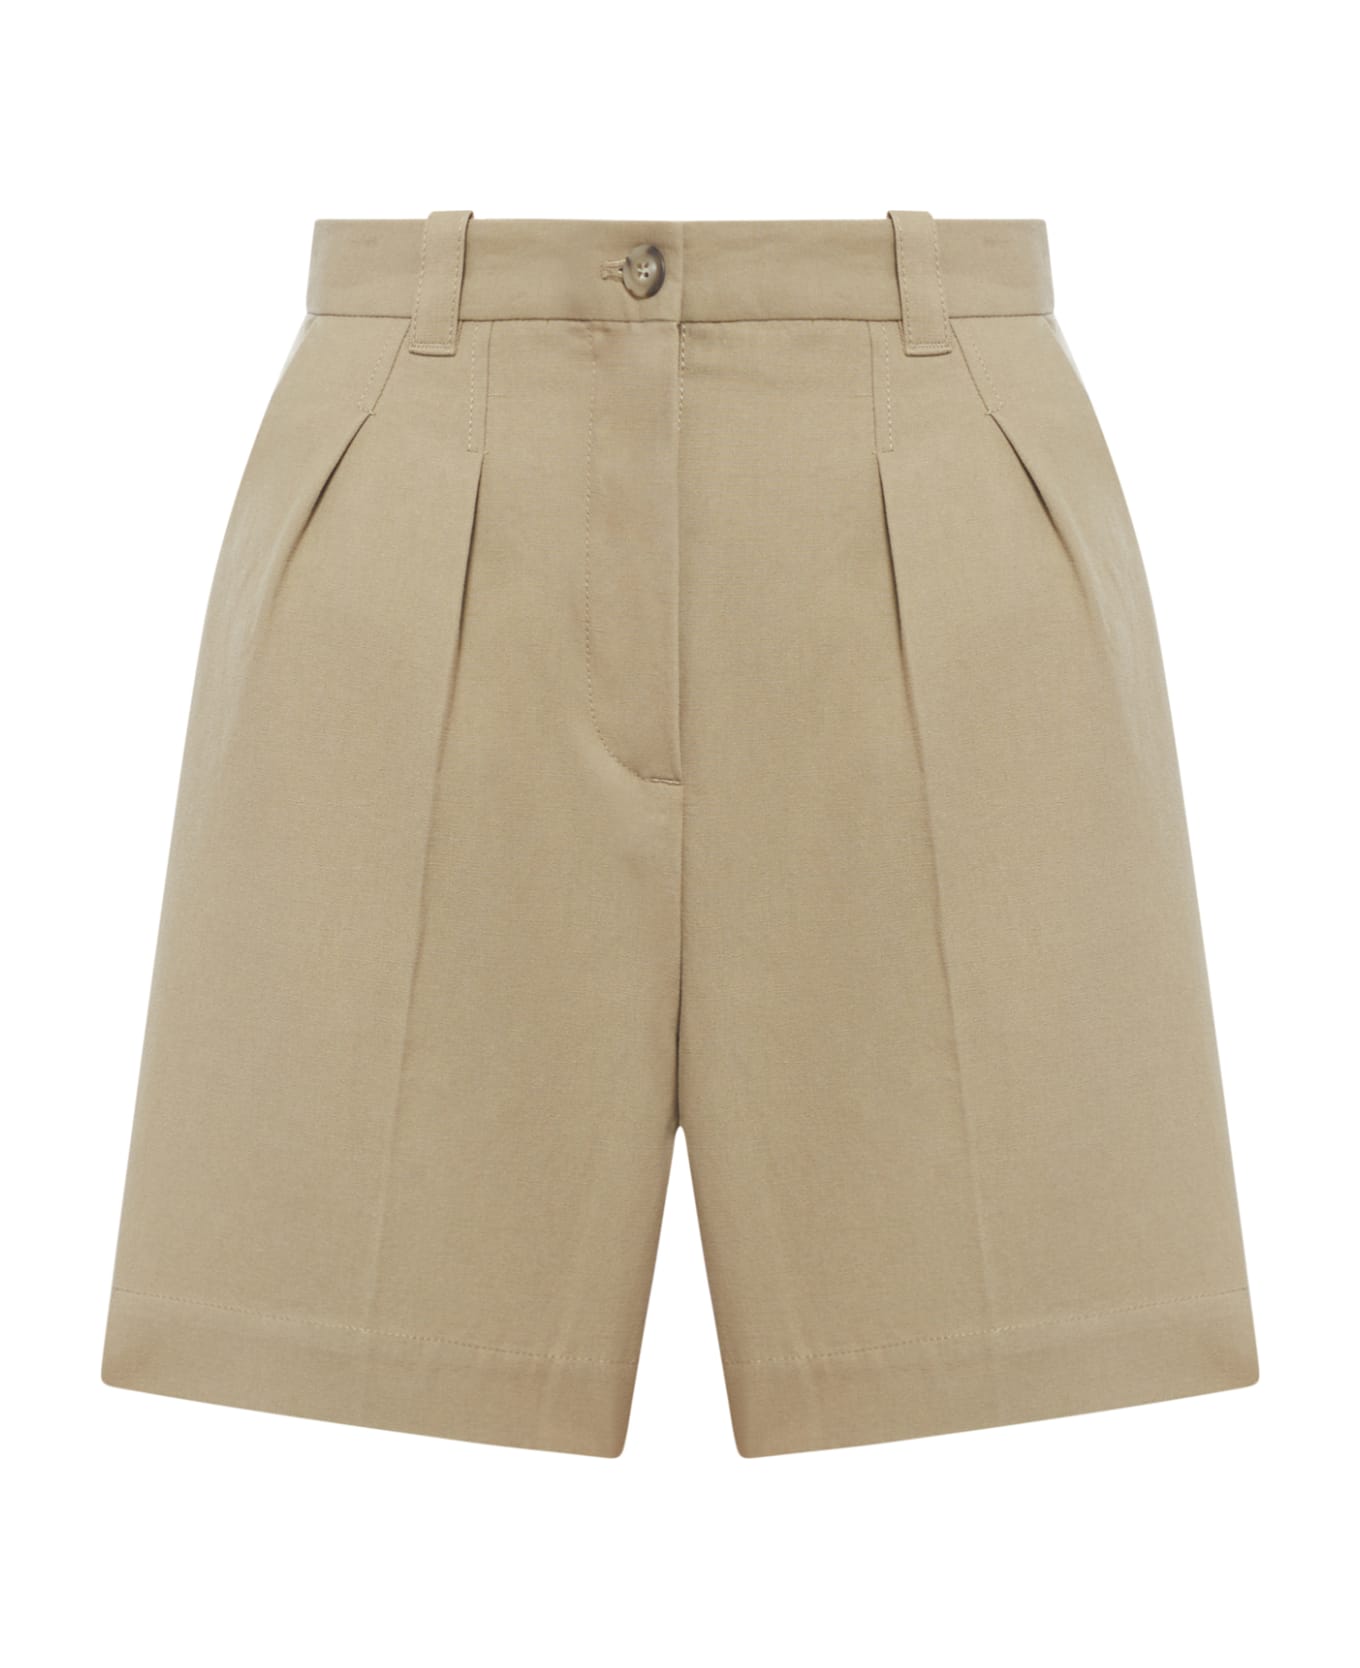 A.P.C. Cotton And Linen Shorts - Baa Beige ショートパンツ